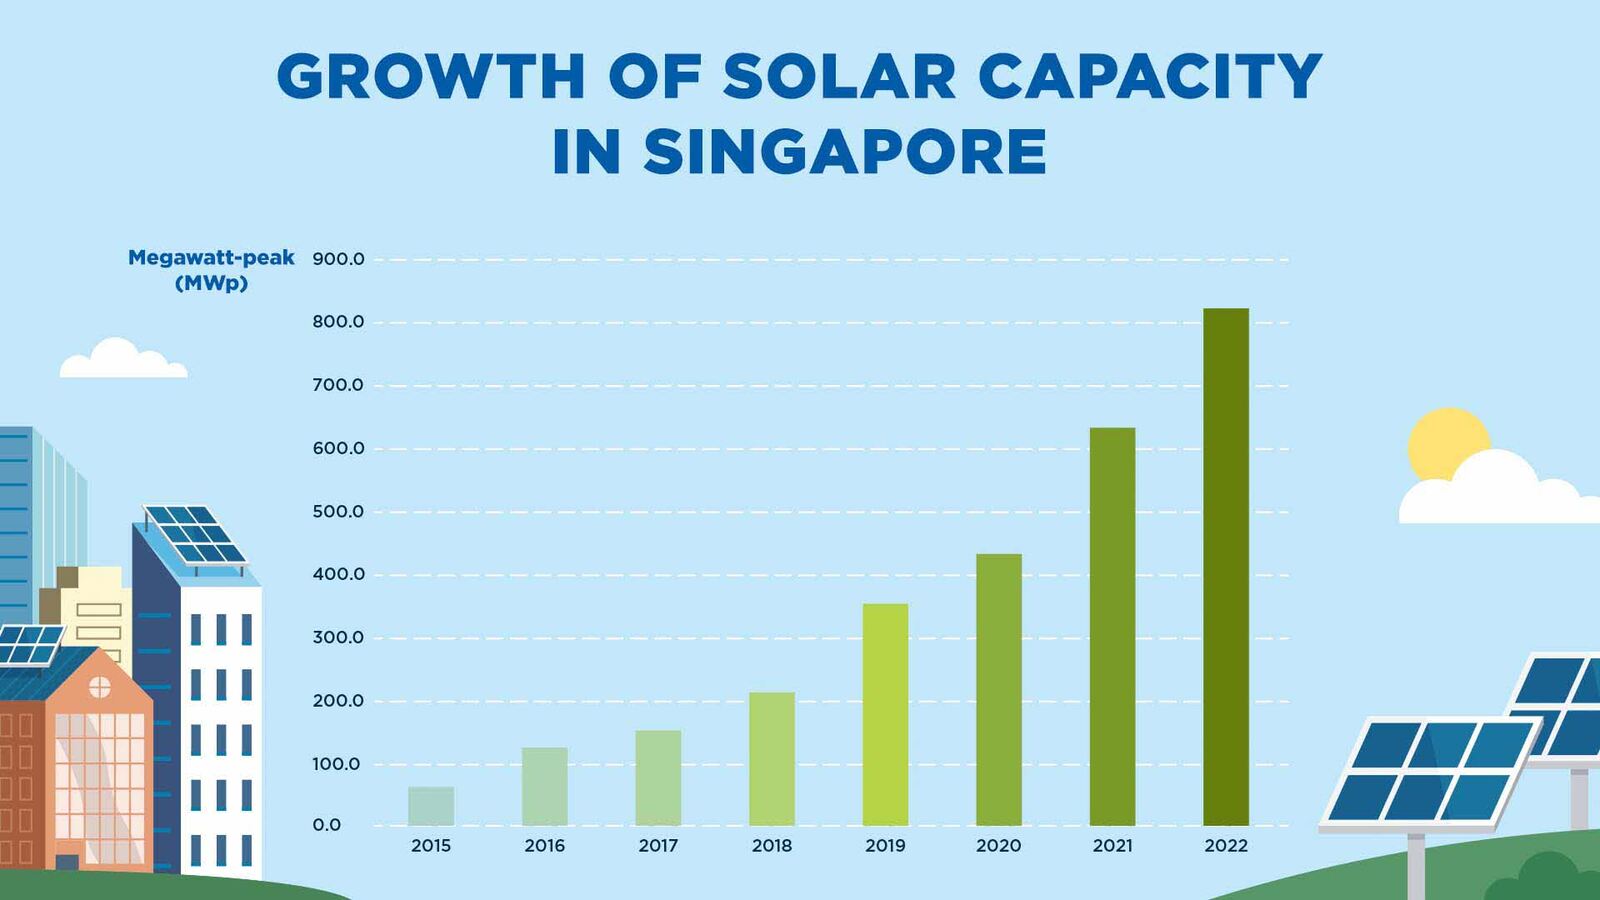 Singapore’s installed solar capacity continues to increase over the years.